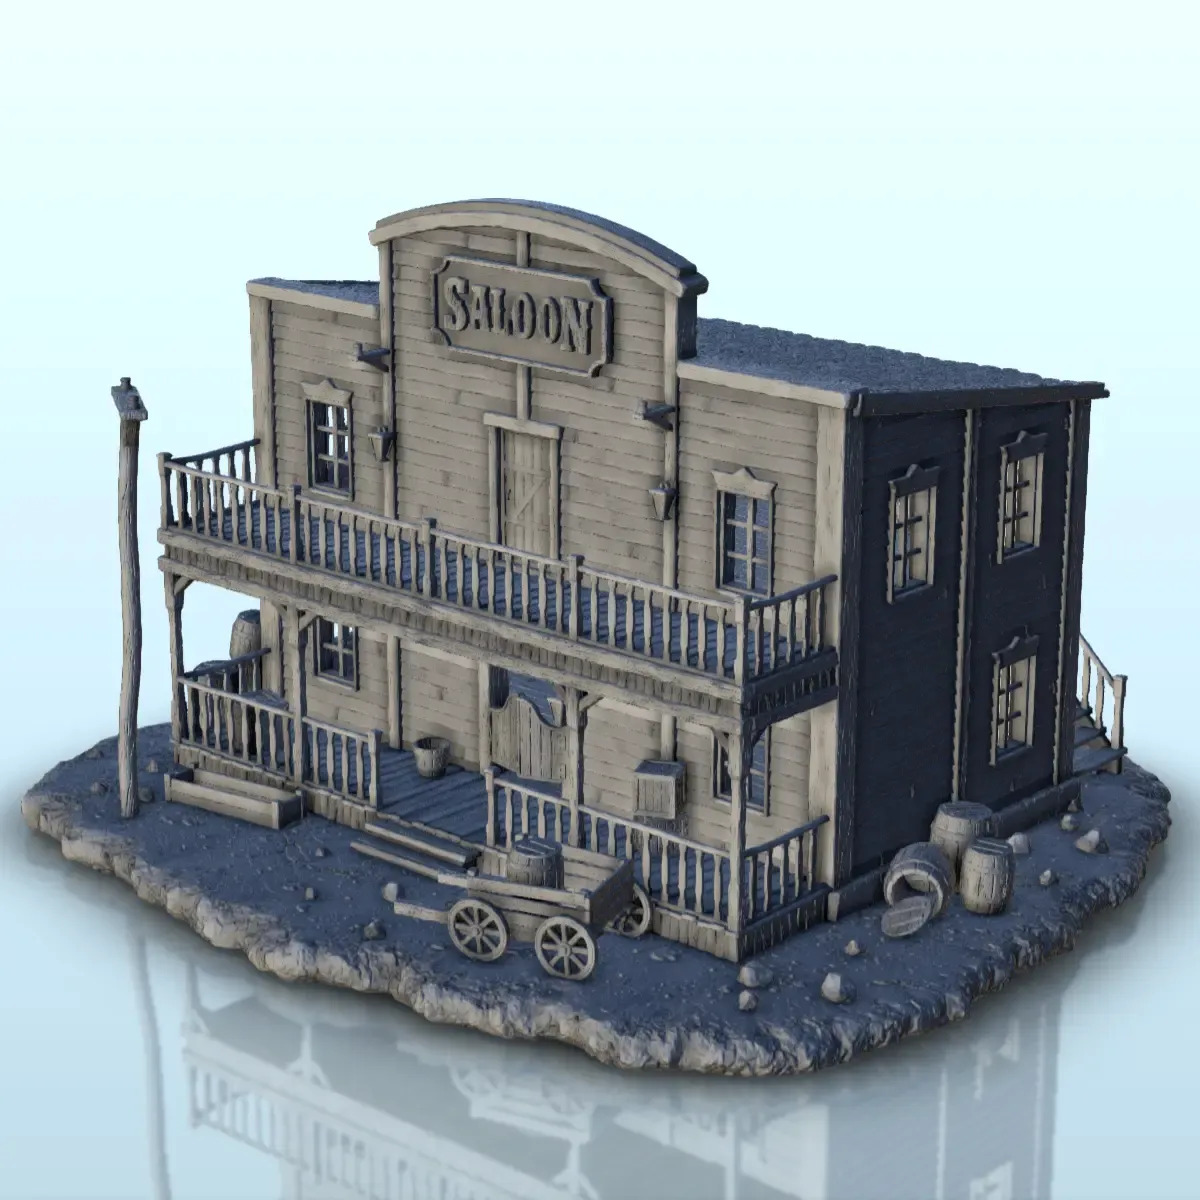 Saloon with two floors and double terraces - Terrain scenery